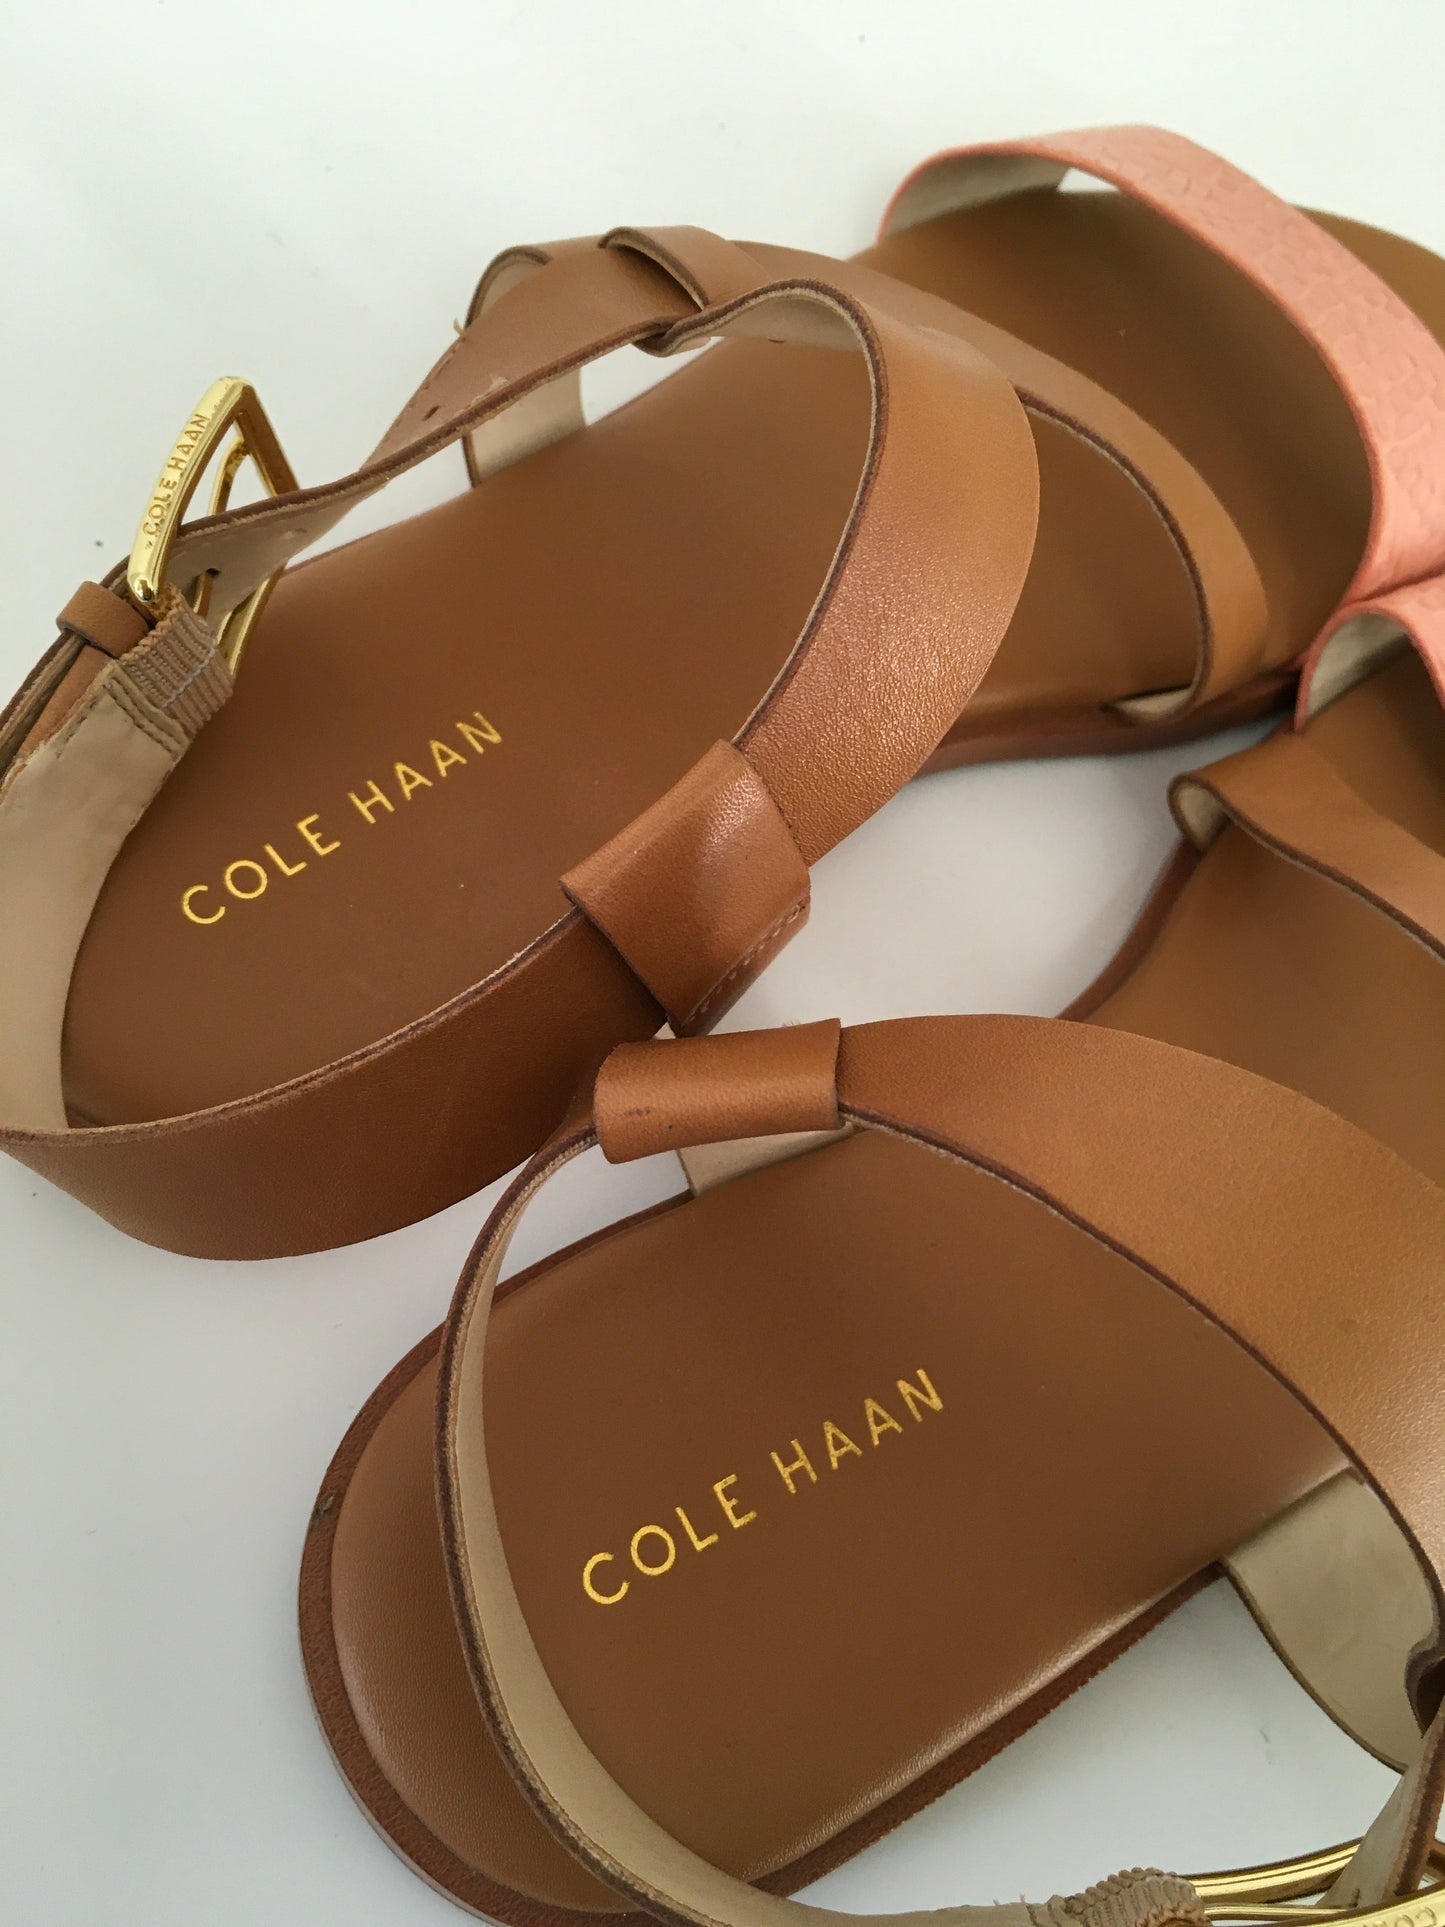 Sandals Flats By Cole-haan  Size: 7